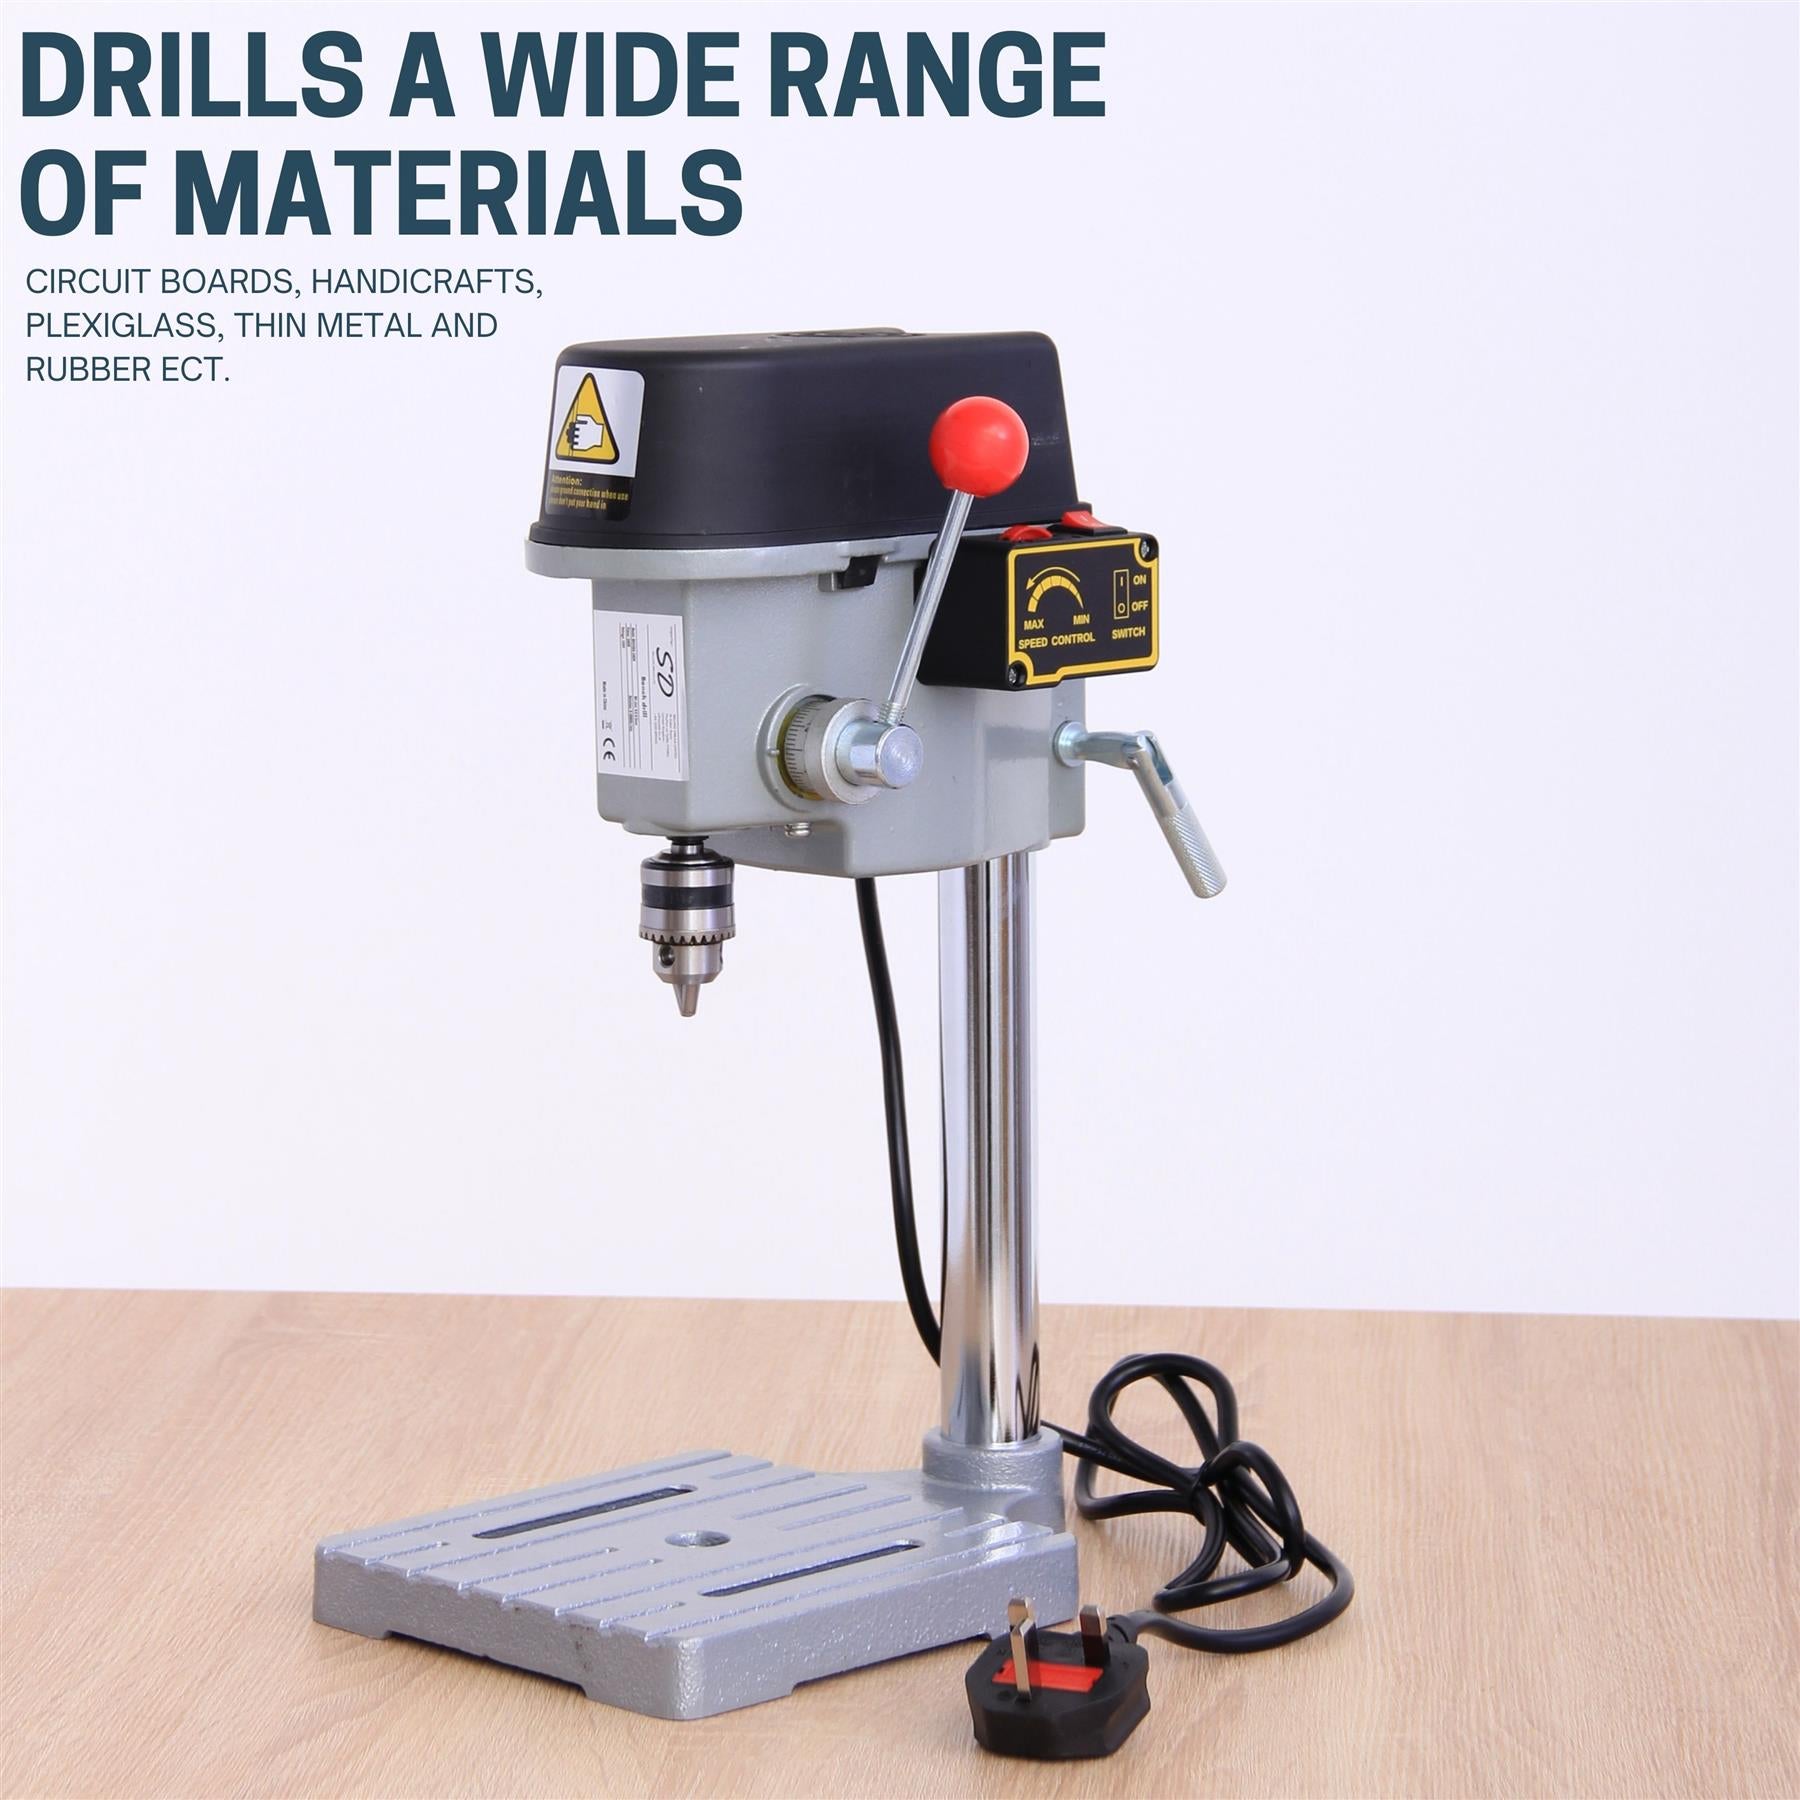 Mini Bench Drilling Machine - Handle Lock Drilling with Adjustable Speed Switch